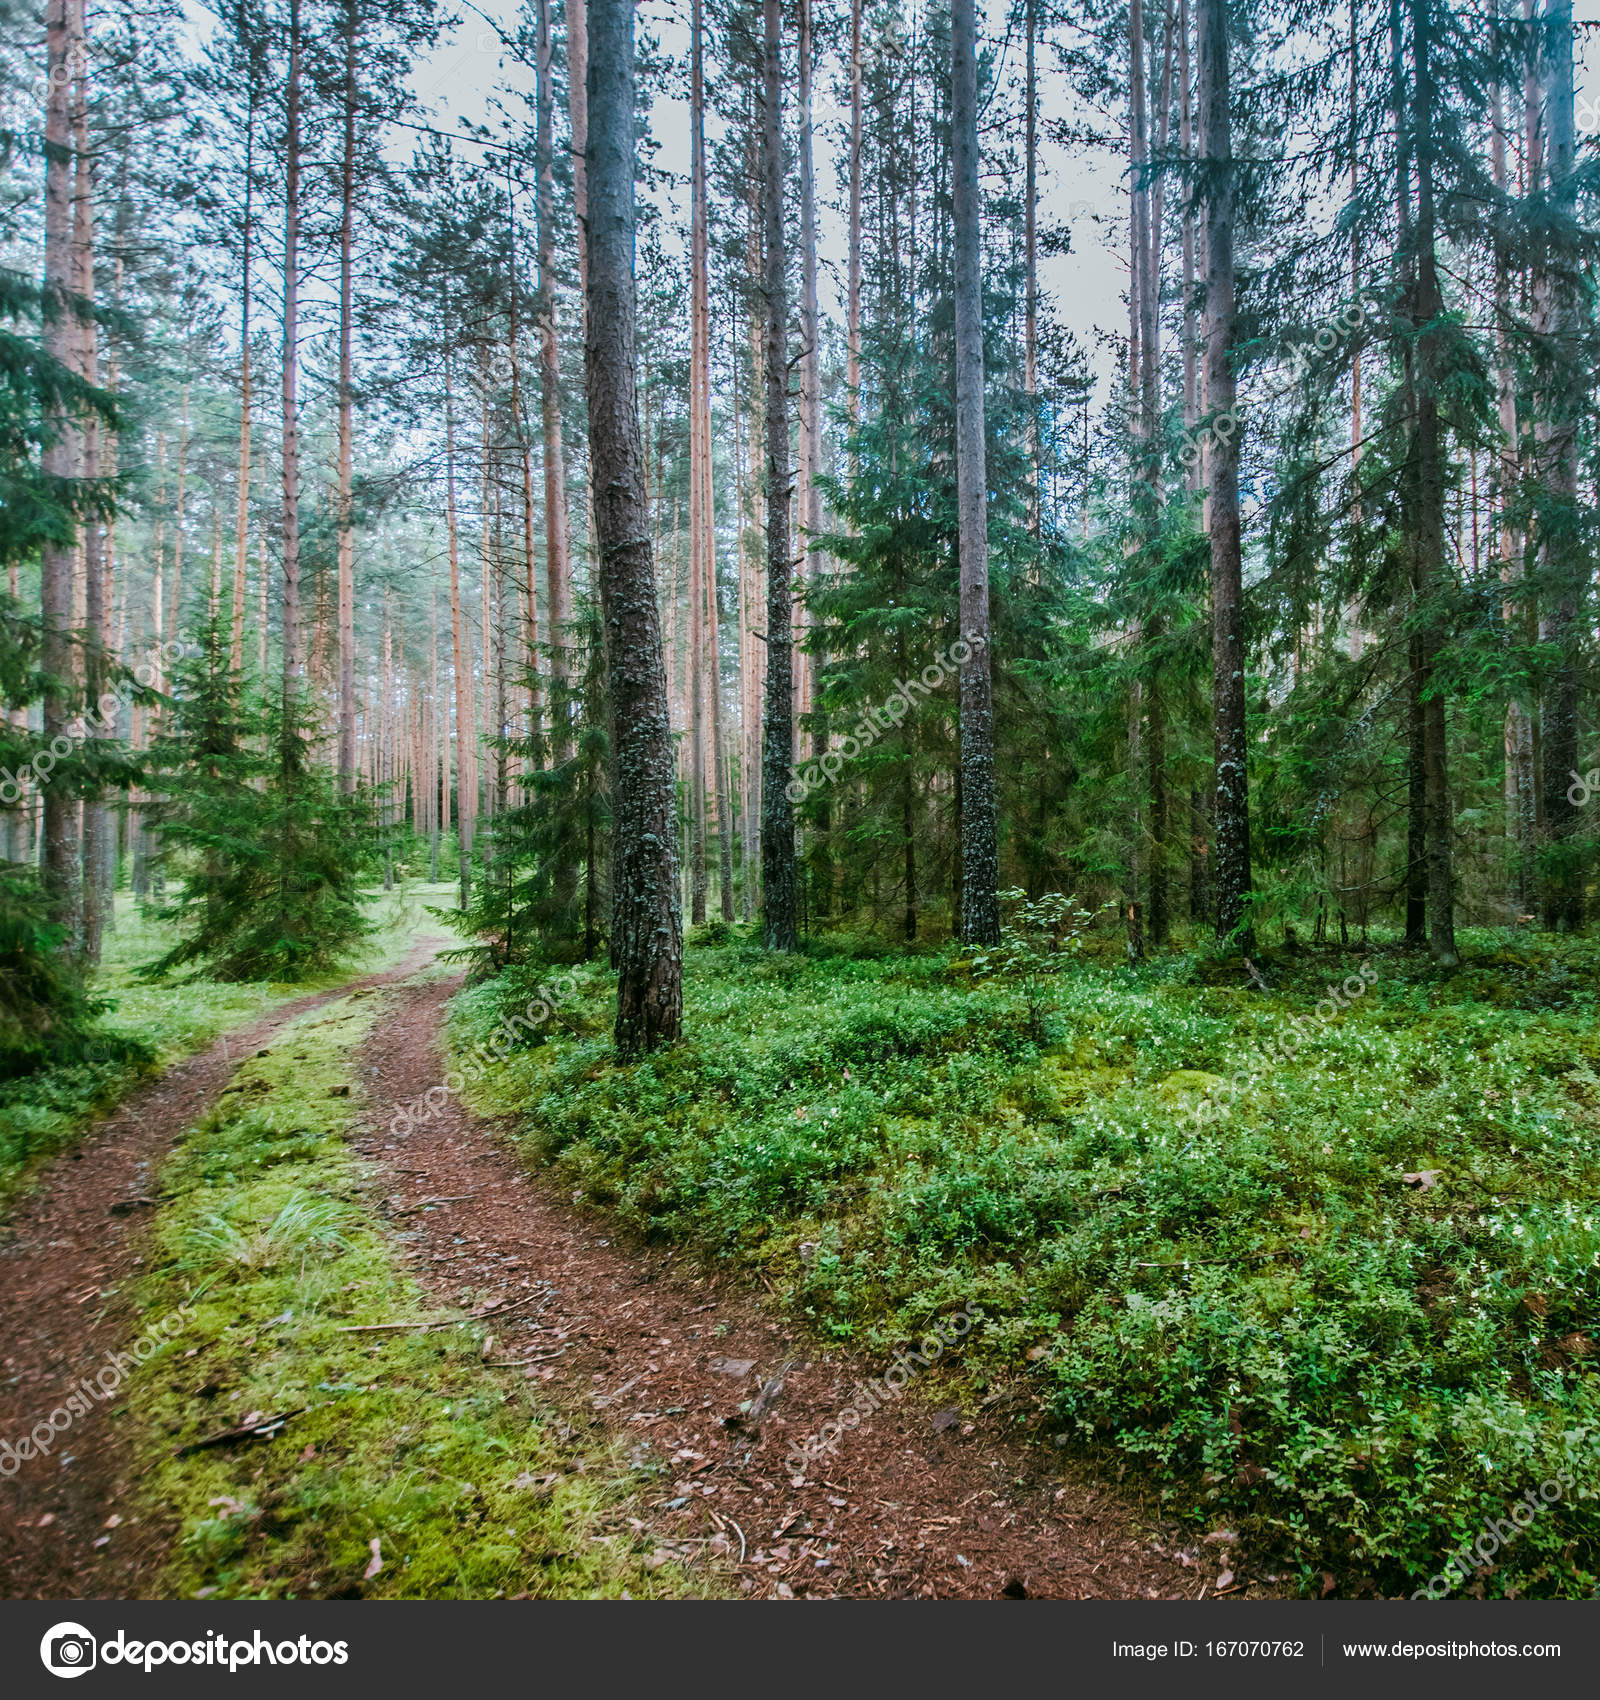 Wild trees in forest — Stock Photo © 1xpert #167070762